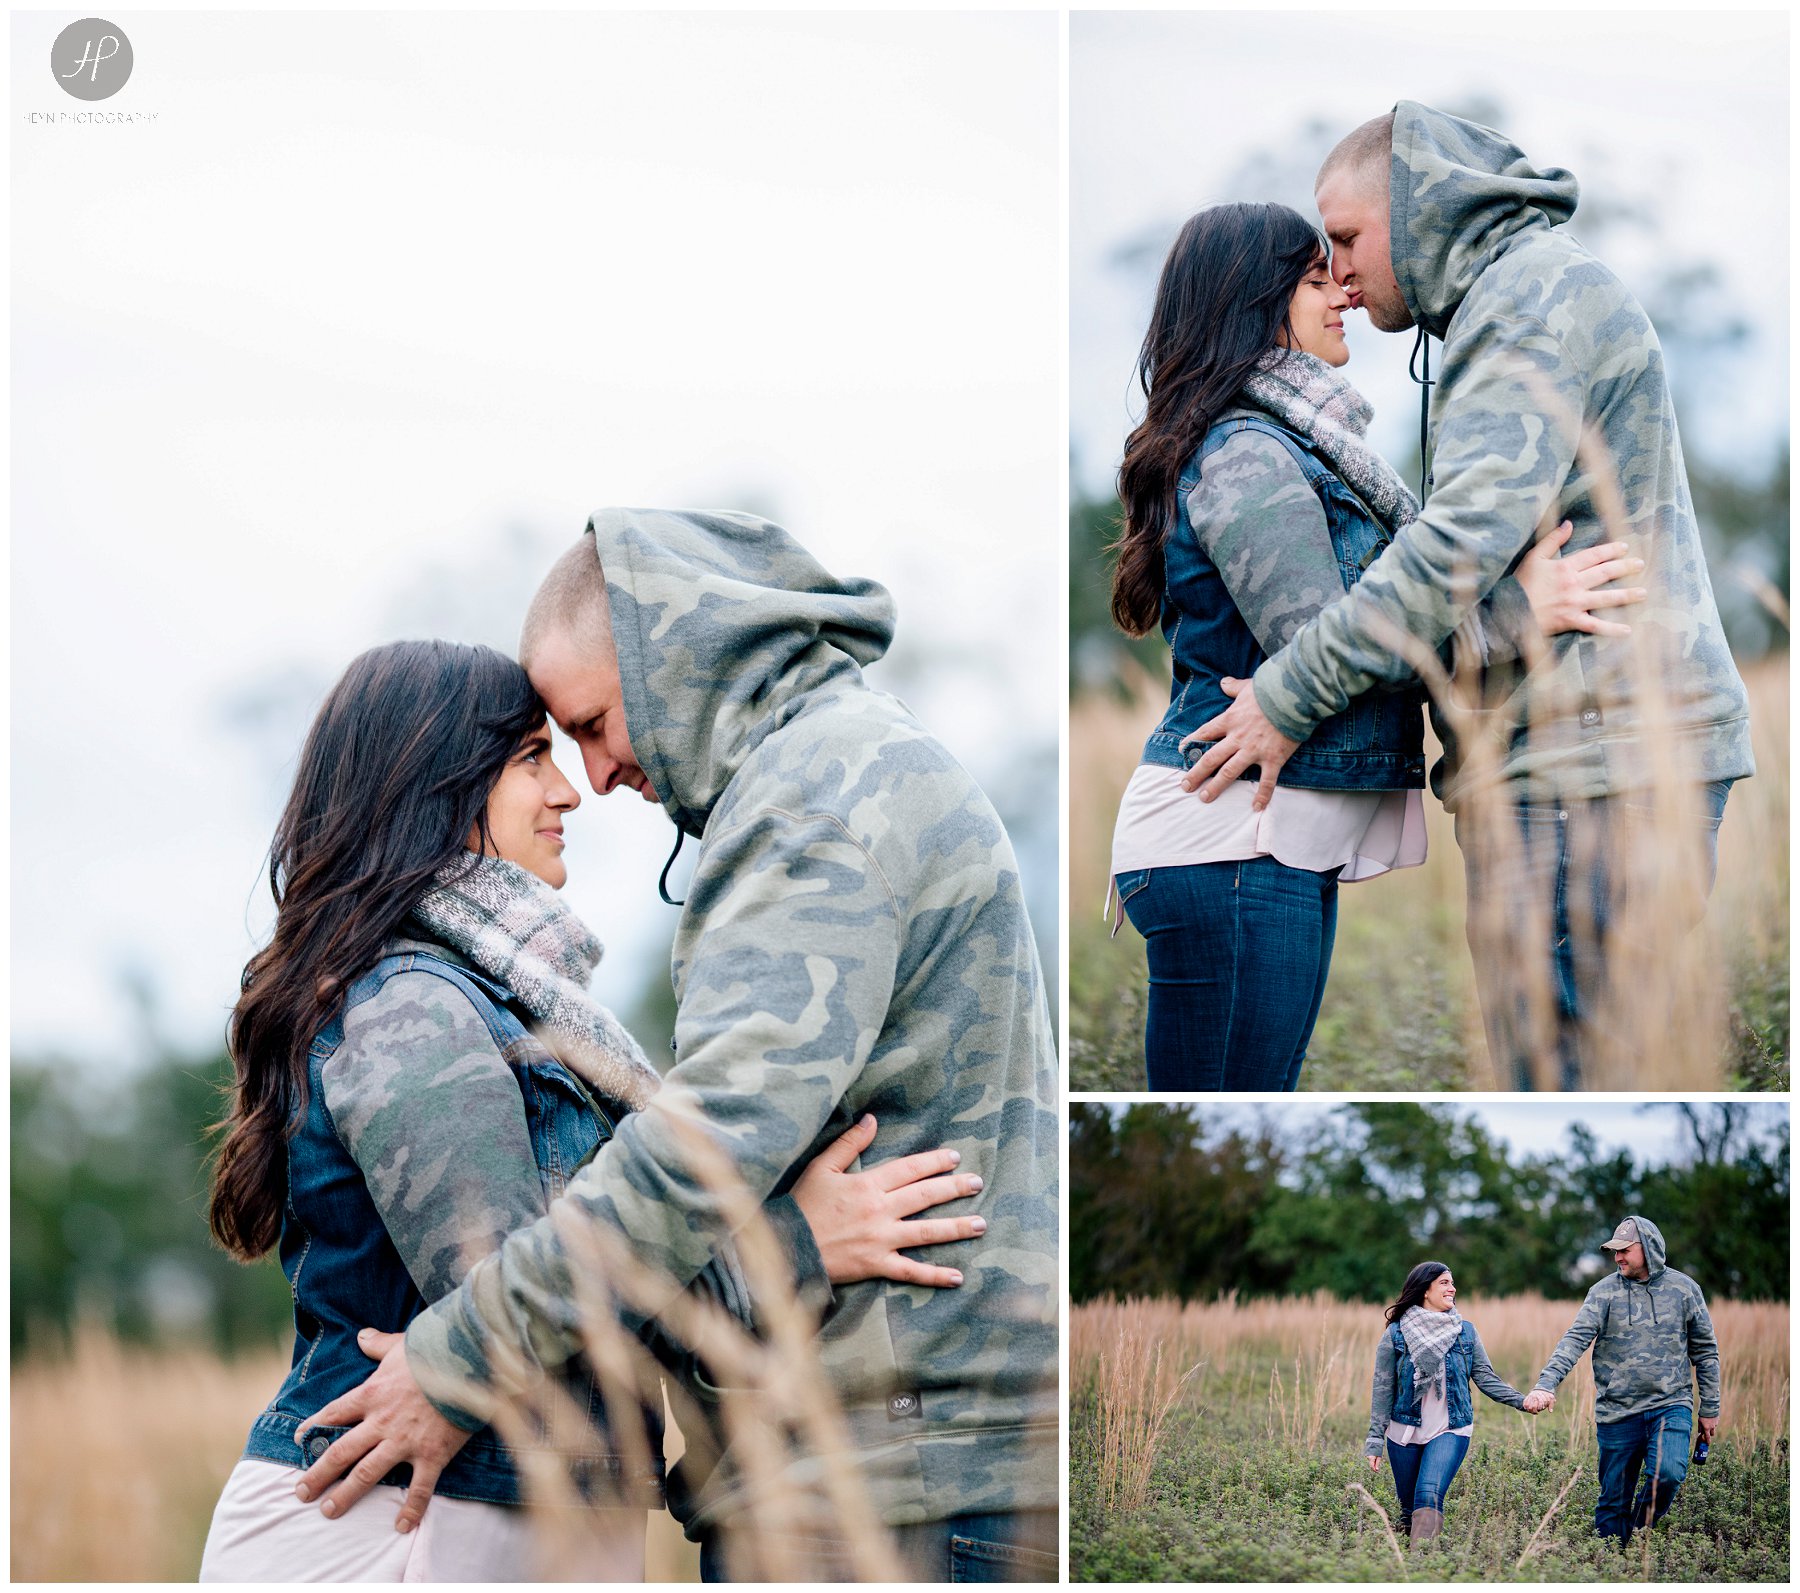  couple in tall grass at bayonet farm engagement session in new jersey